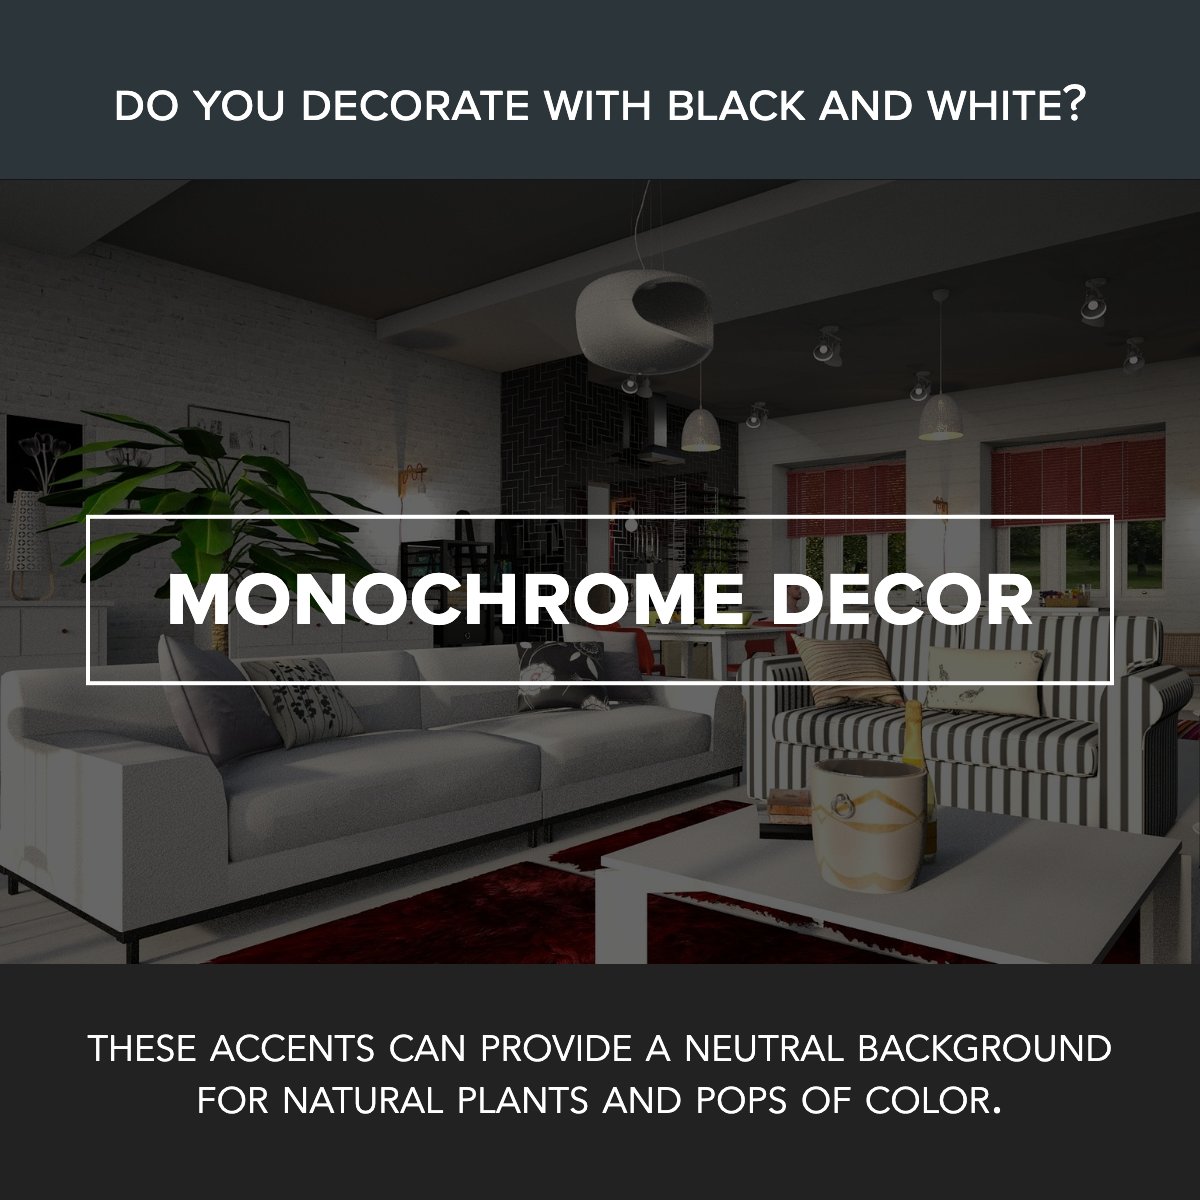 What do you think about Monochrome Decor? 🤔

Tell us in the comments below! 👀

#whiteandblack #style #interiordesign #homedetails #homedecorideas